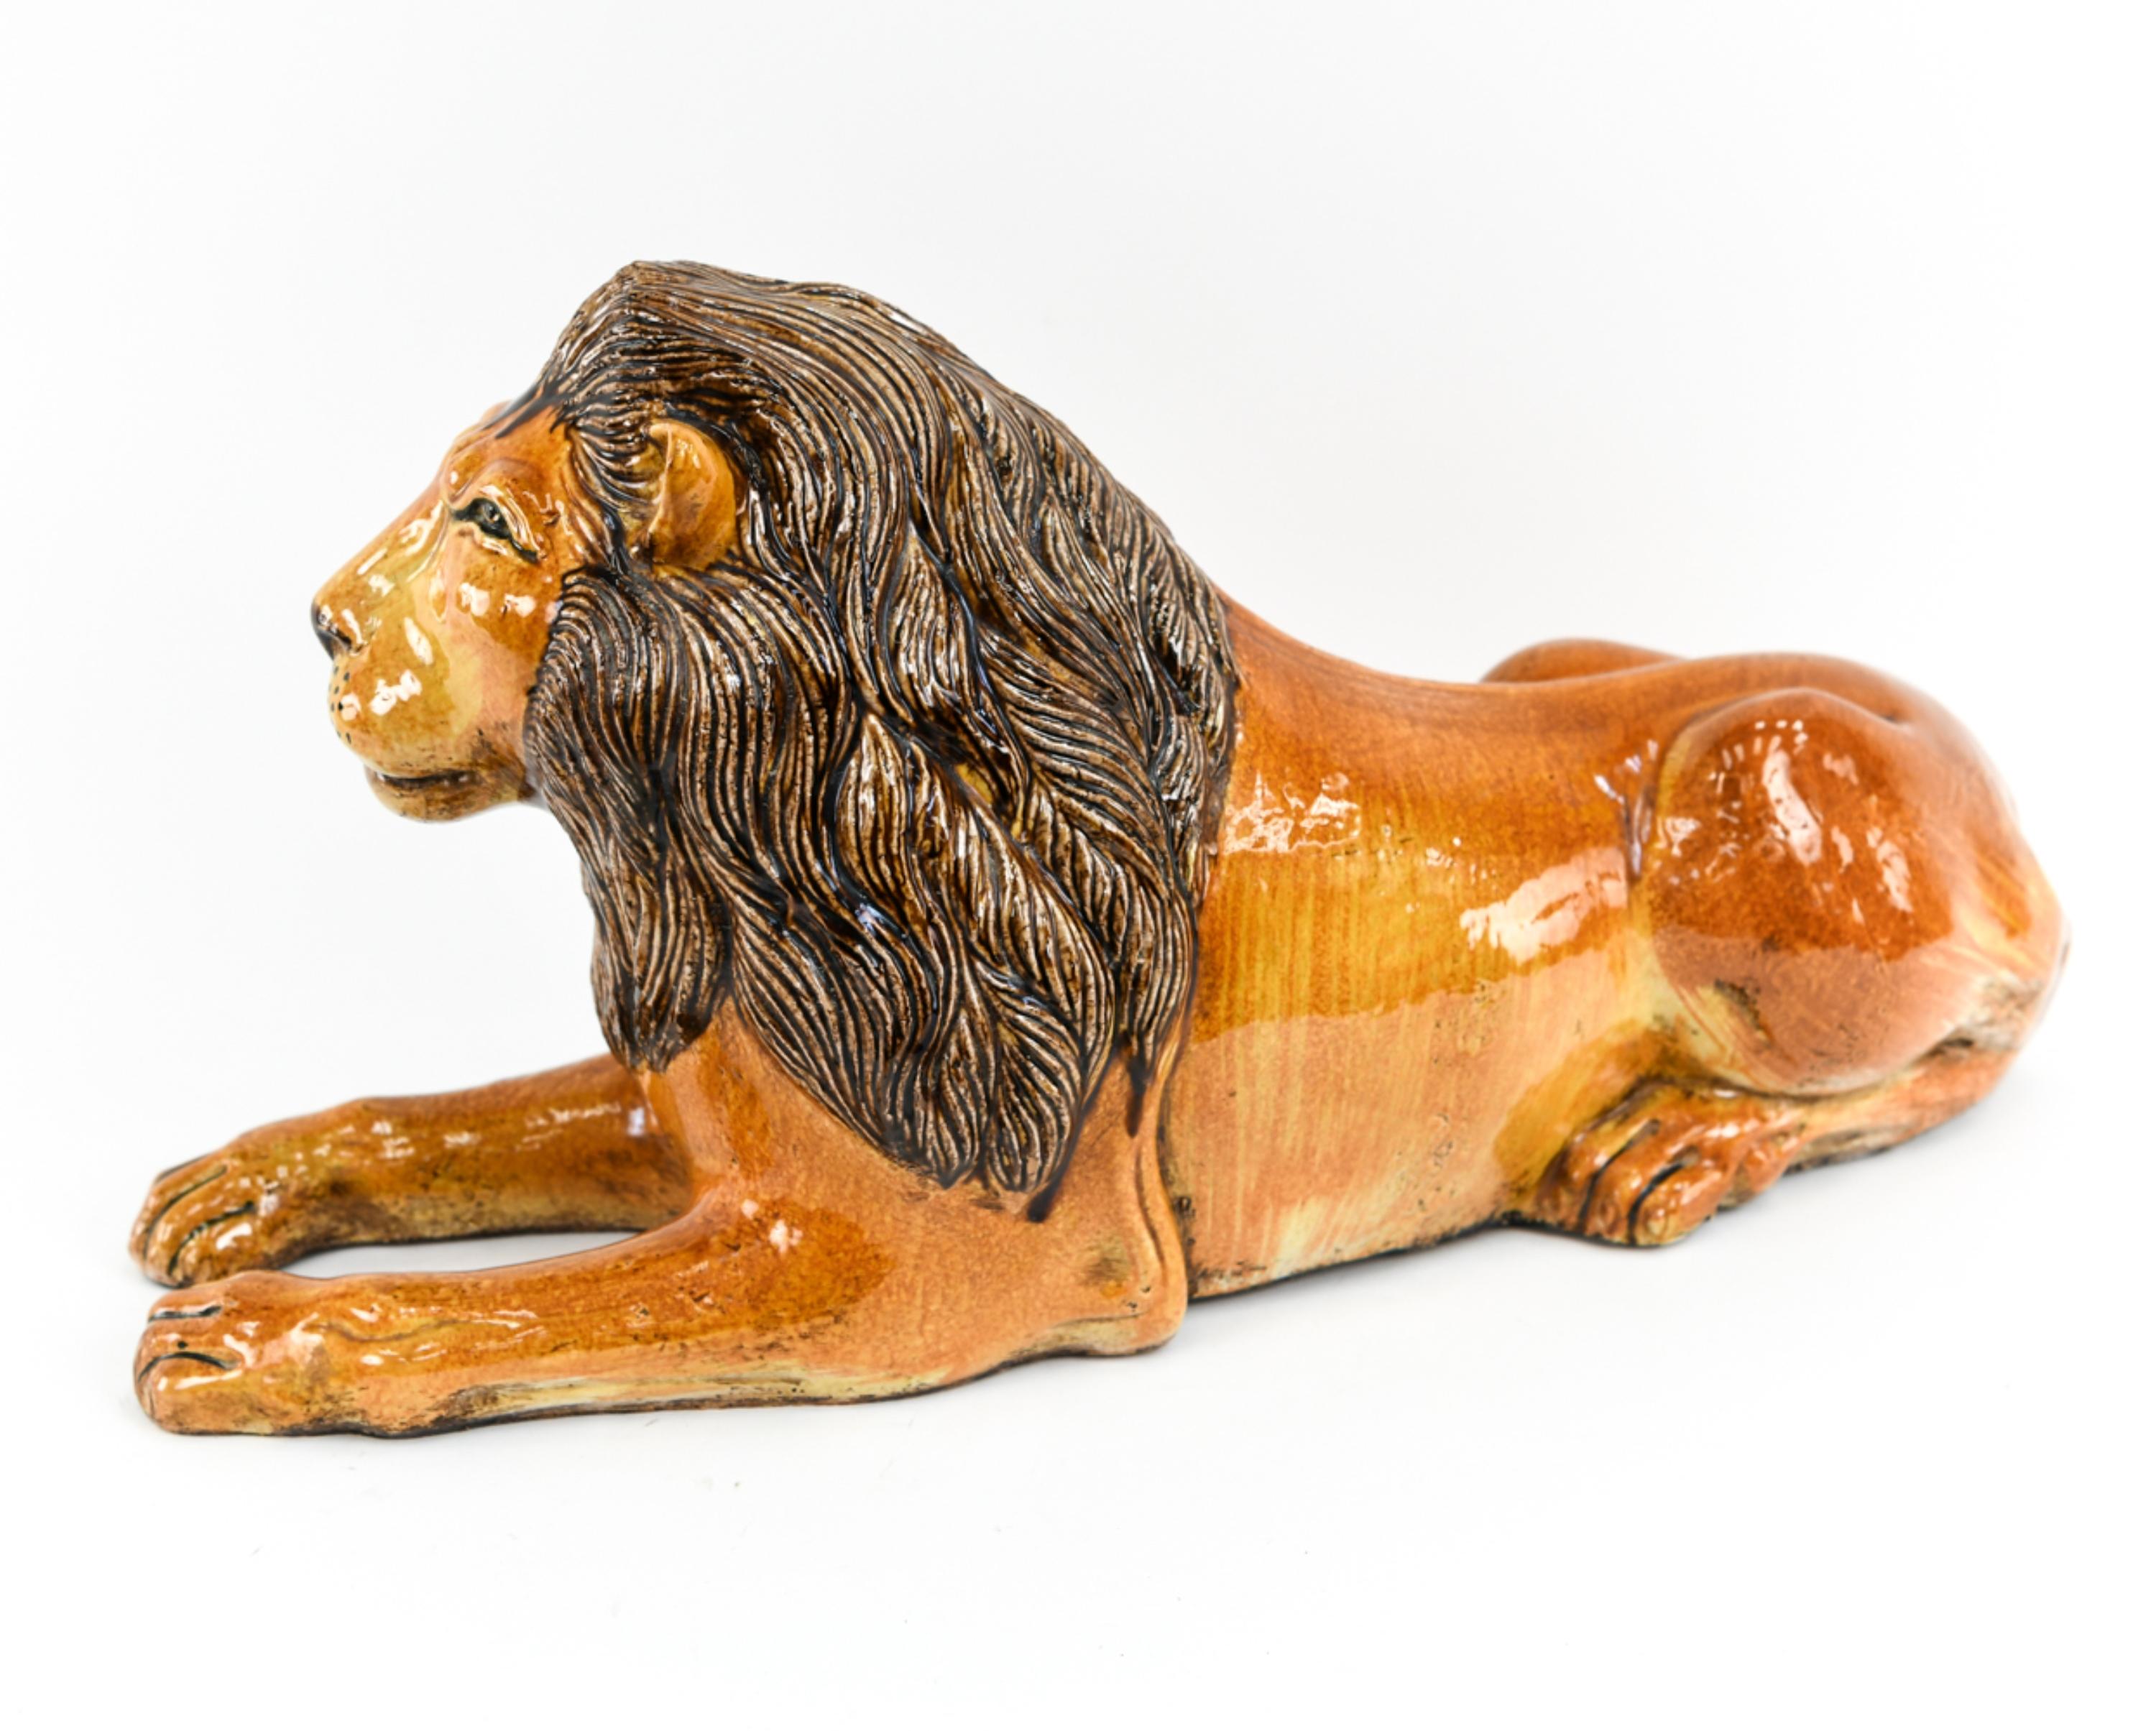 This majestic clay lion sculpture makes a decorative statement as a console centerpiece or doorway sentry. Apparently unsigned.